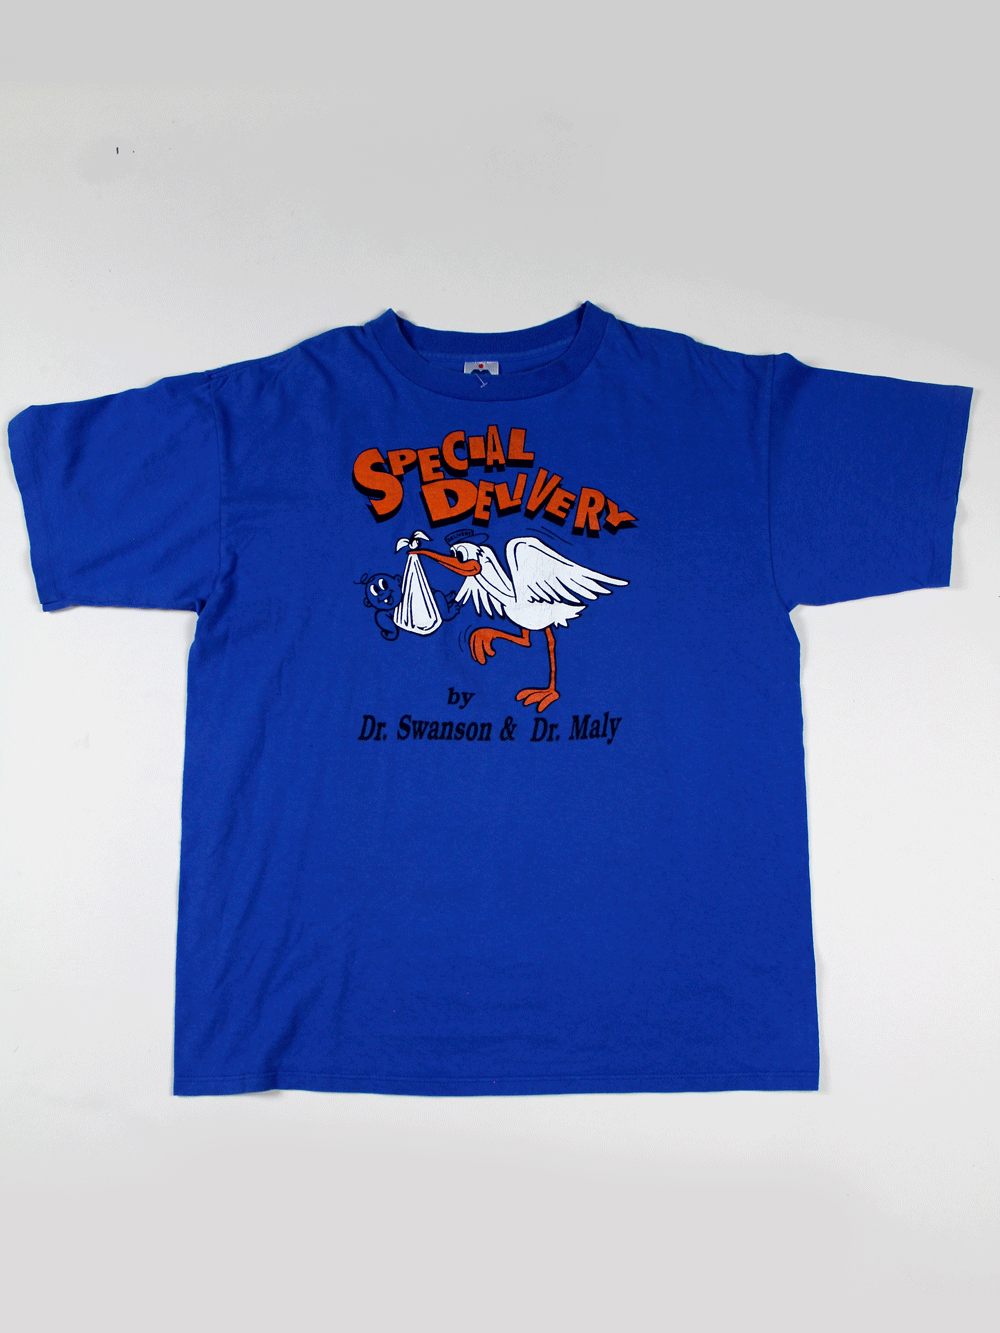 Vintage Special Delivery T-shirt